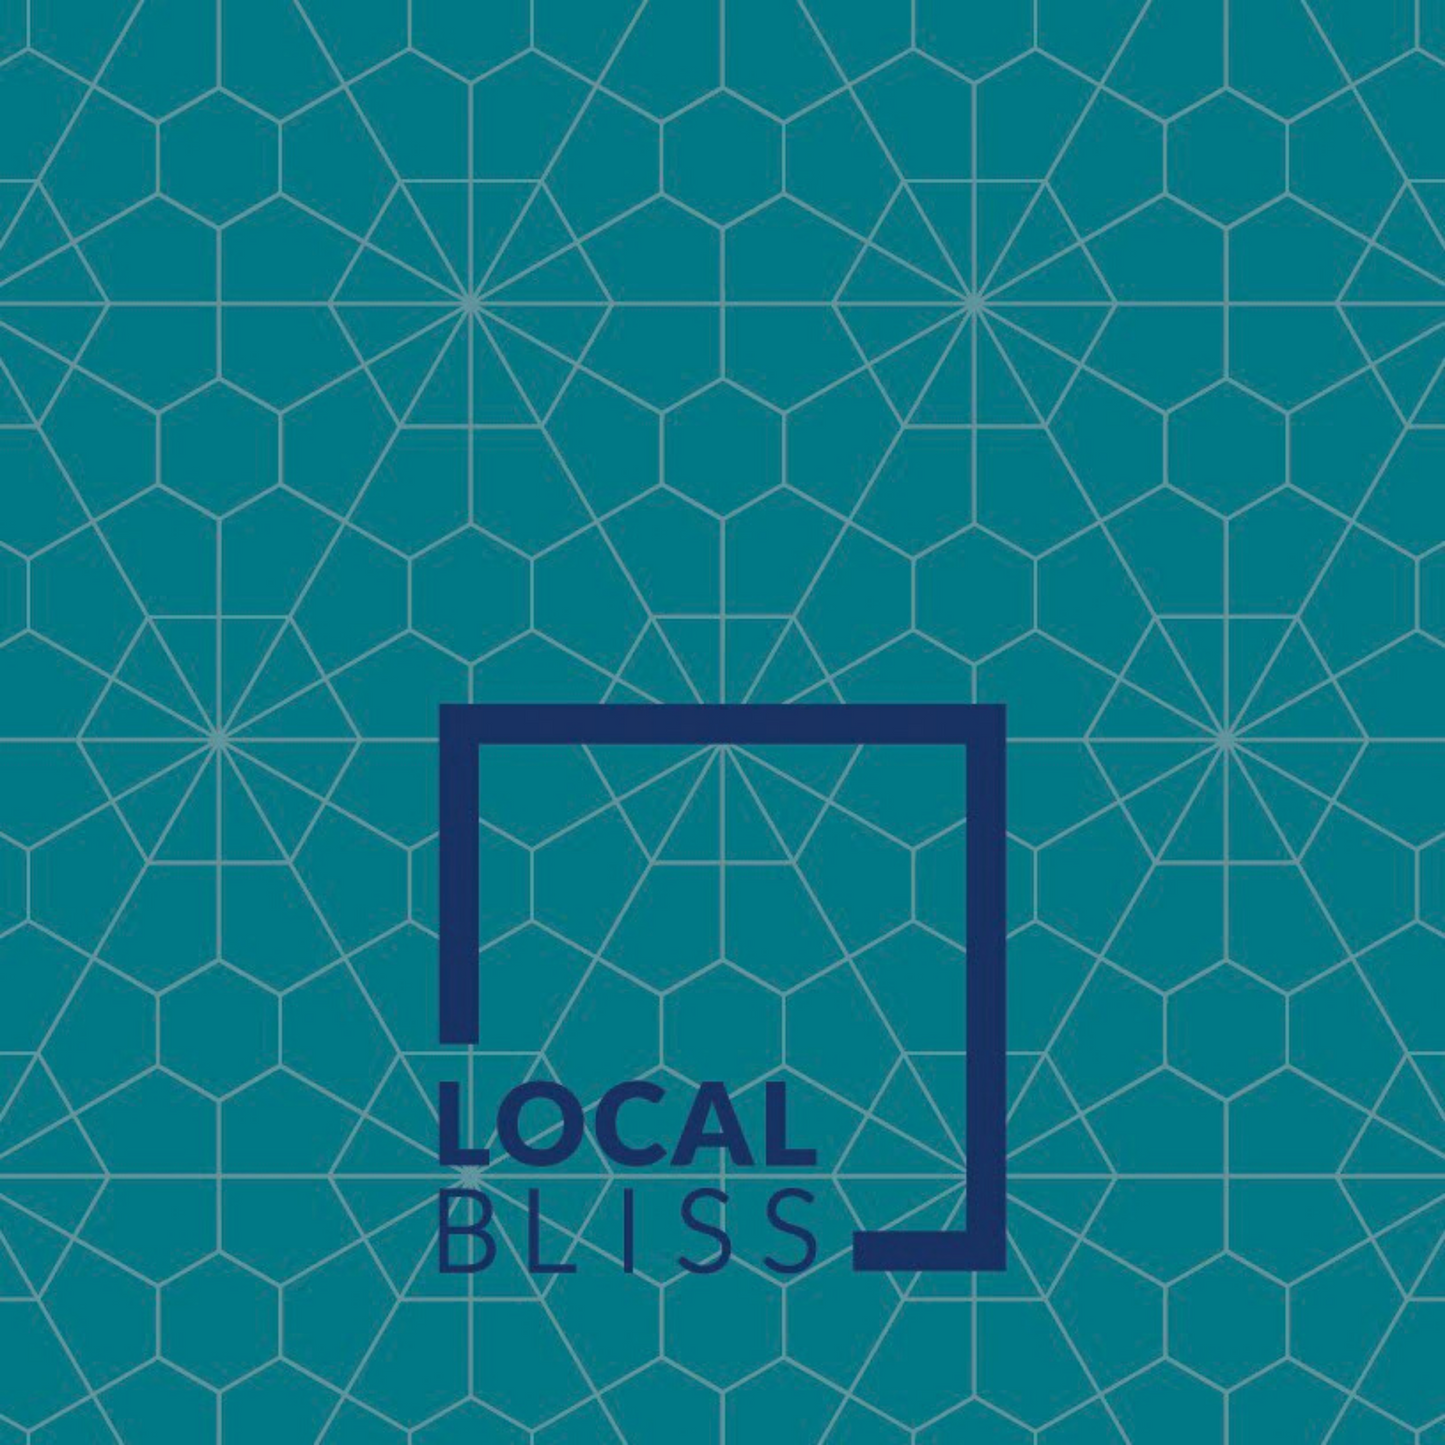 Local Bliss gift card teal image with navy logo.